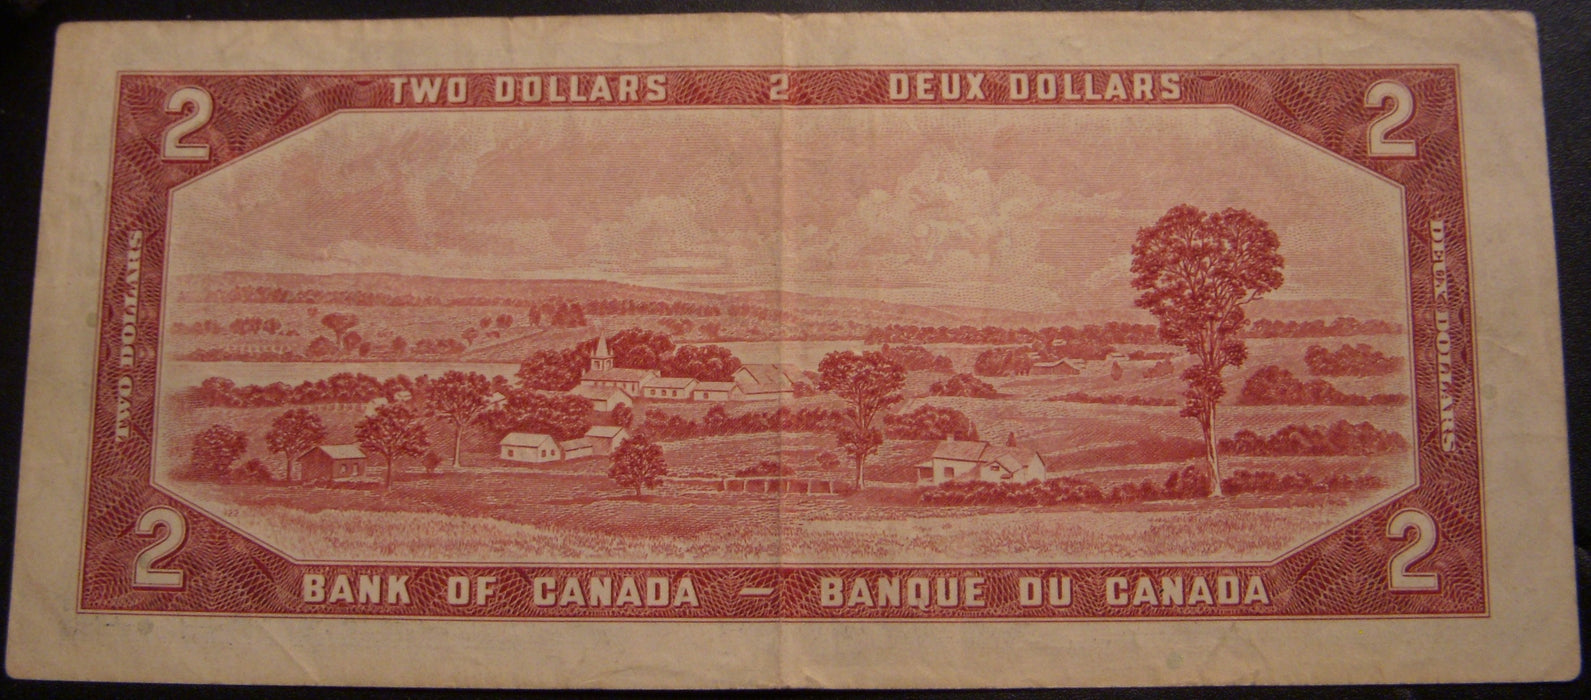 1954 $2 Bank of Canada Note - BC-38b